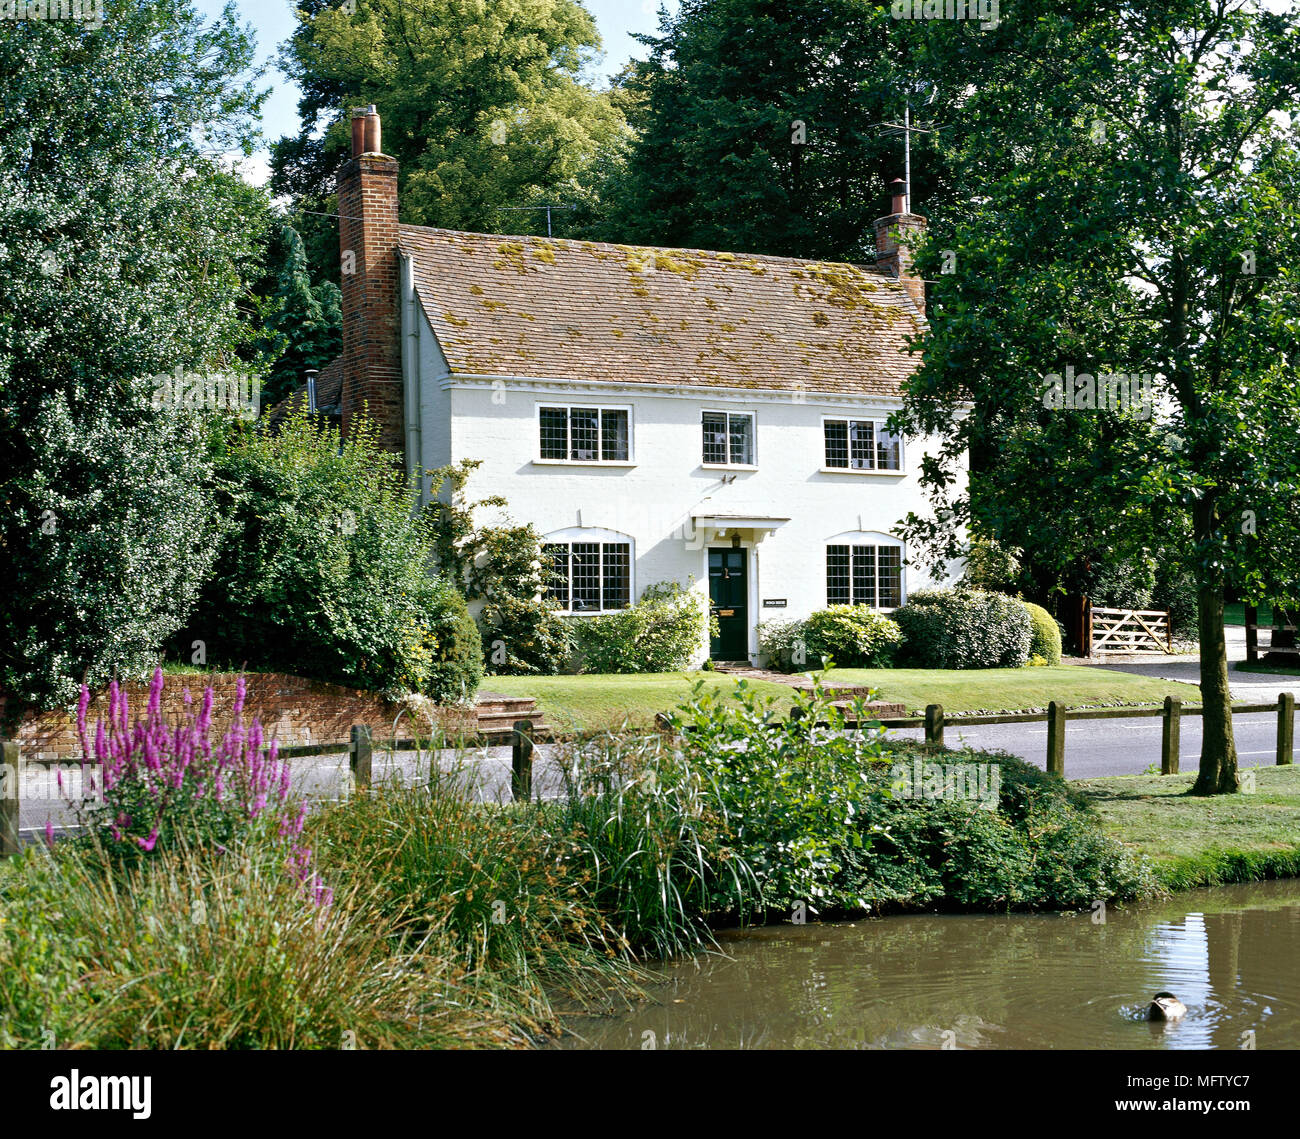 An exterior of a white painted detached country house, village pond, Stock Photo